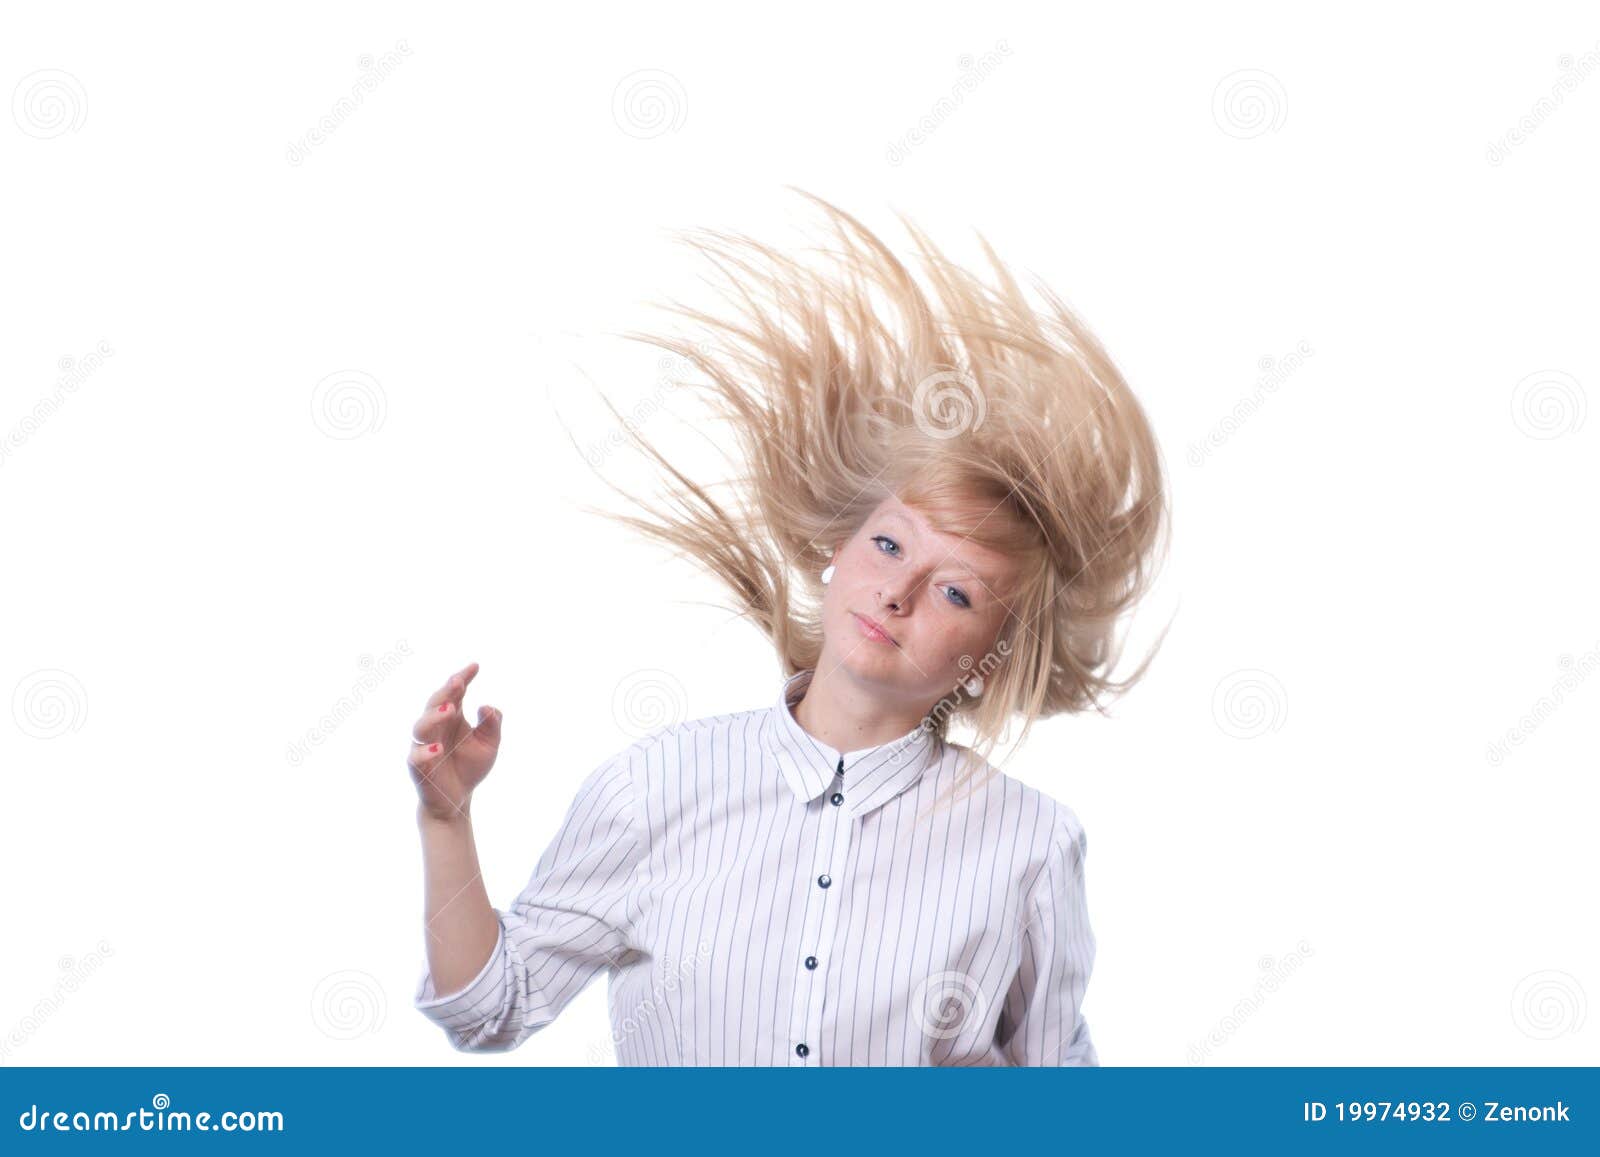 Golden hair young woman on white background with flying hair.